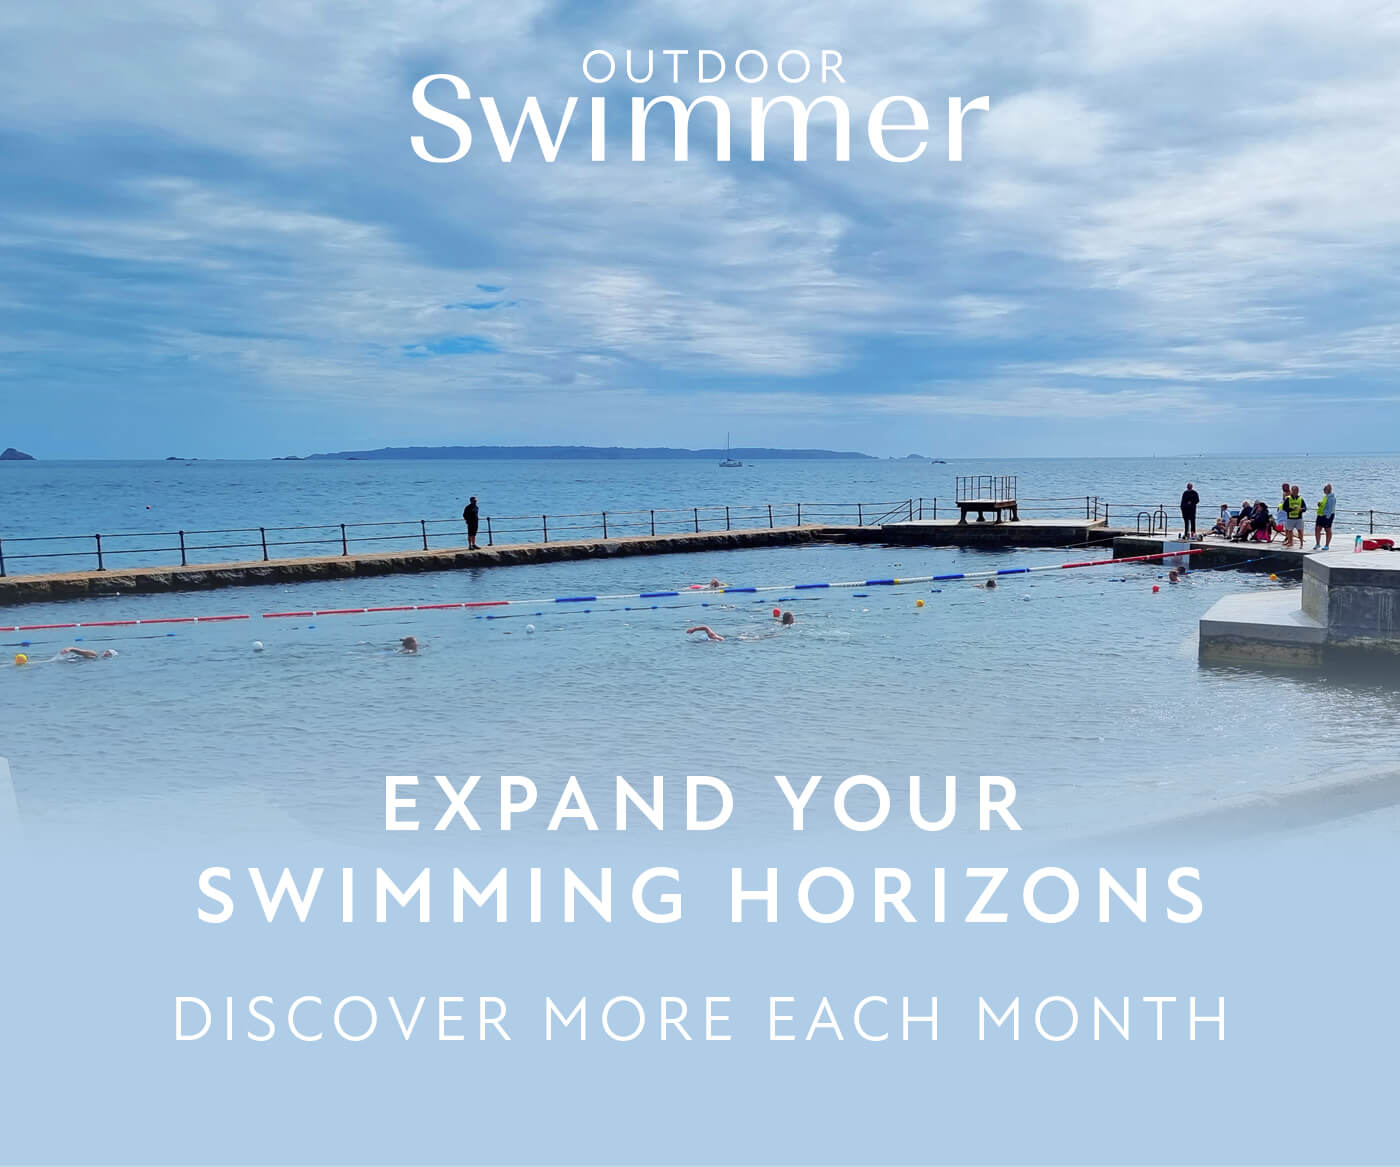 Expand your Swimming Horizons with Outdoor Swimmer magazine